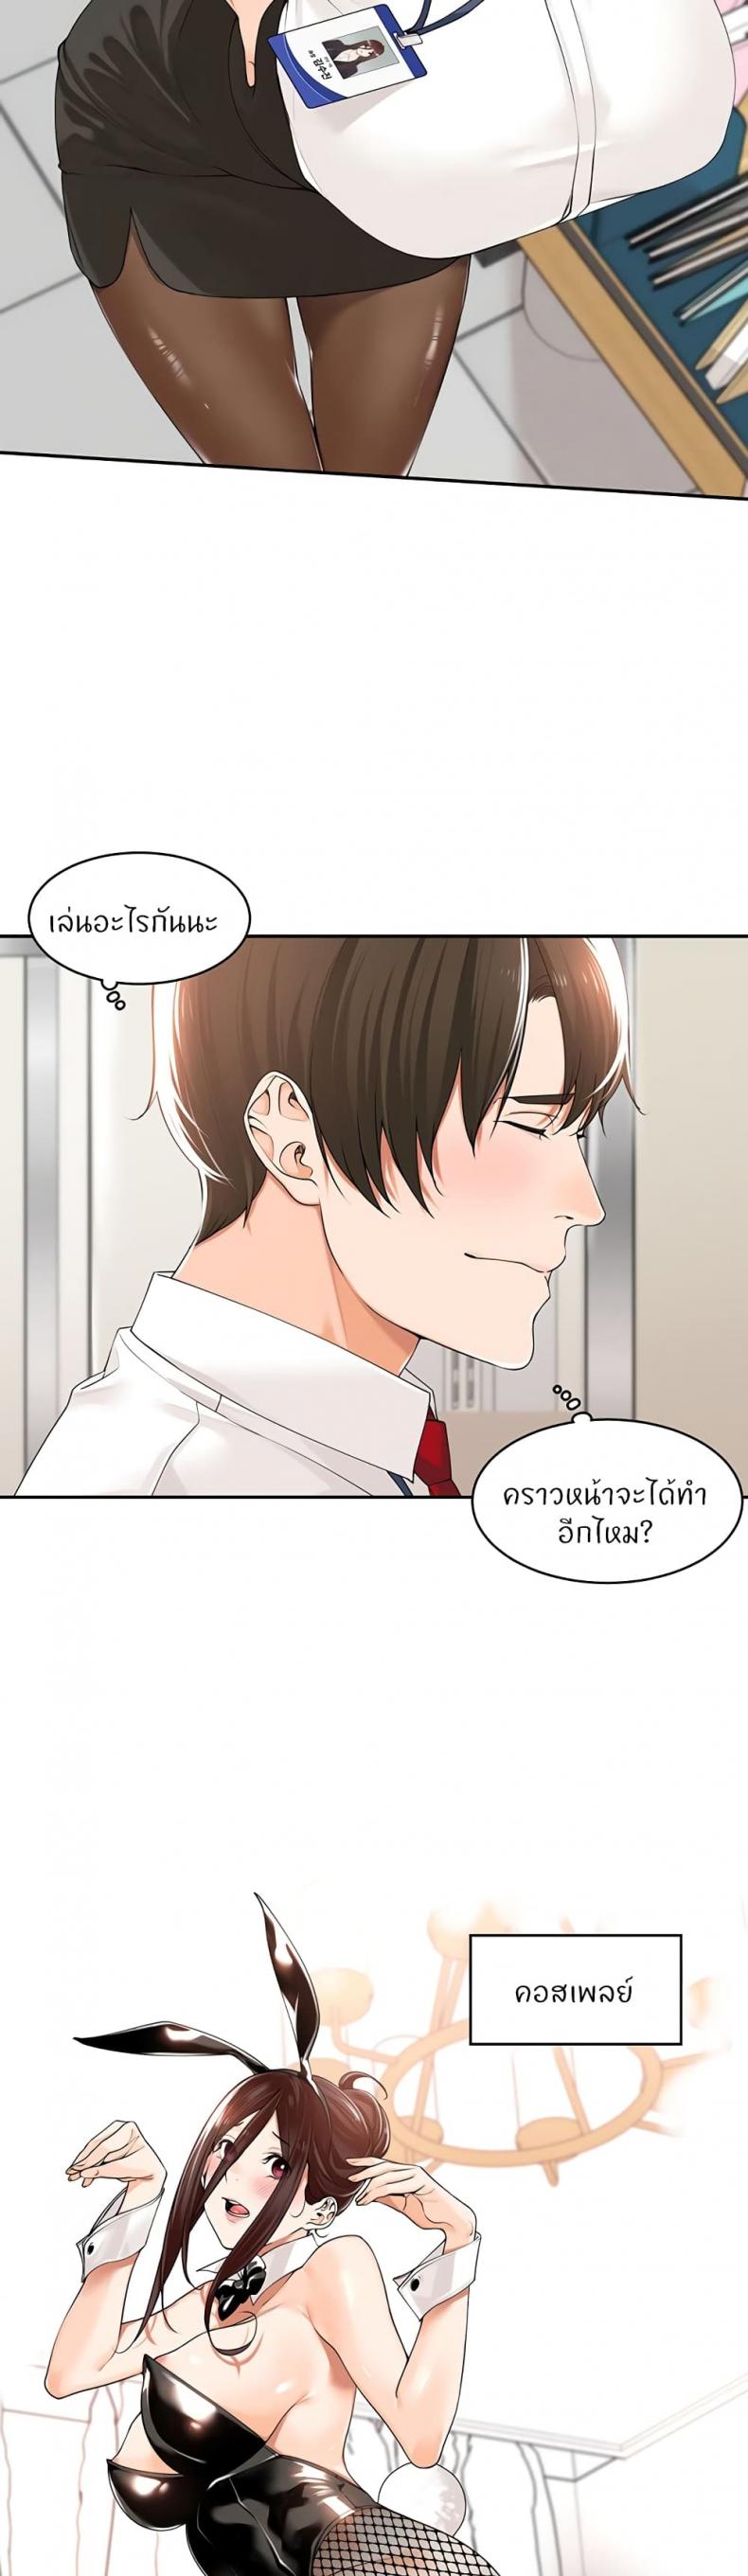 Manager, Please Scold Me 17 ภาพที่ 4